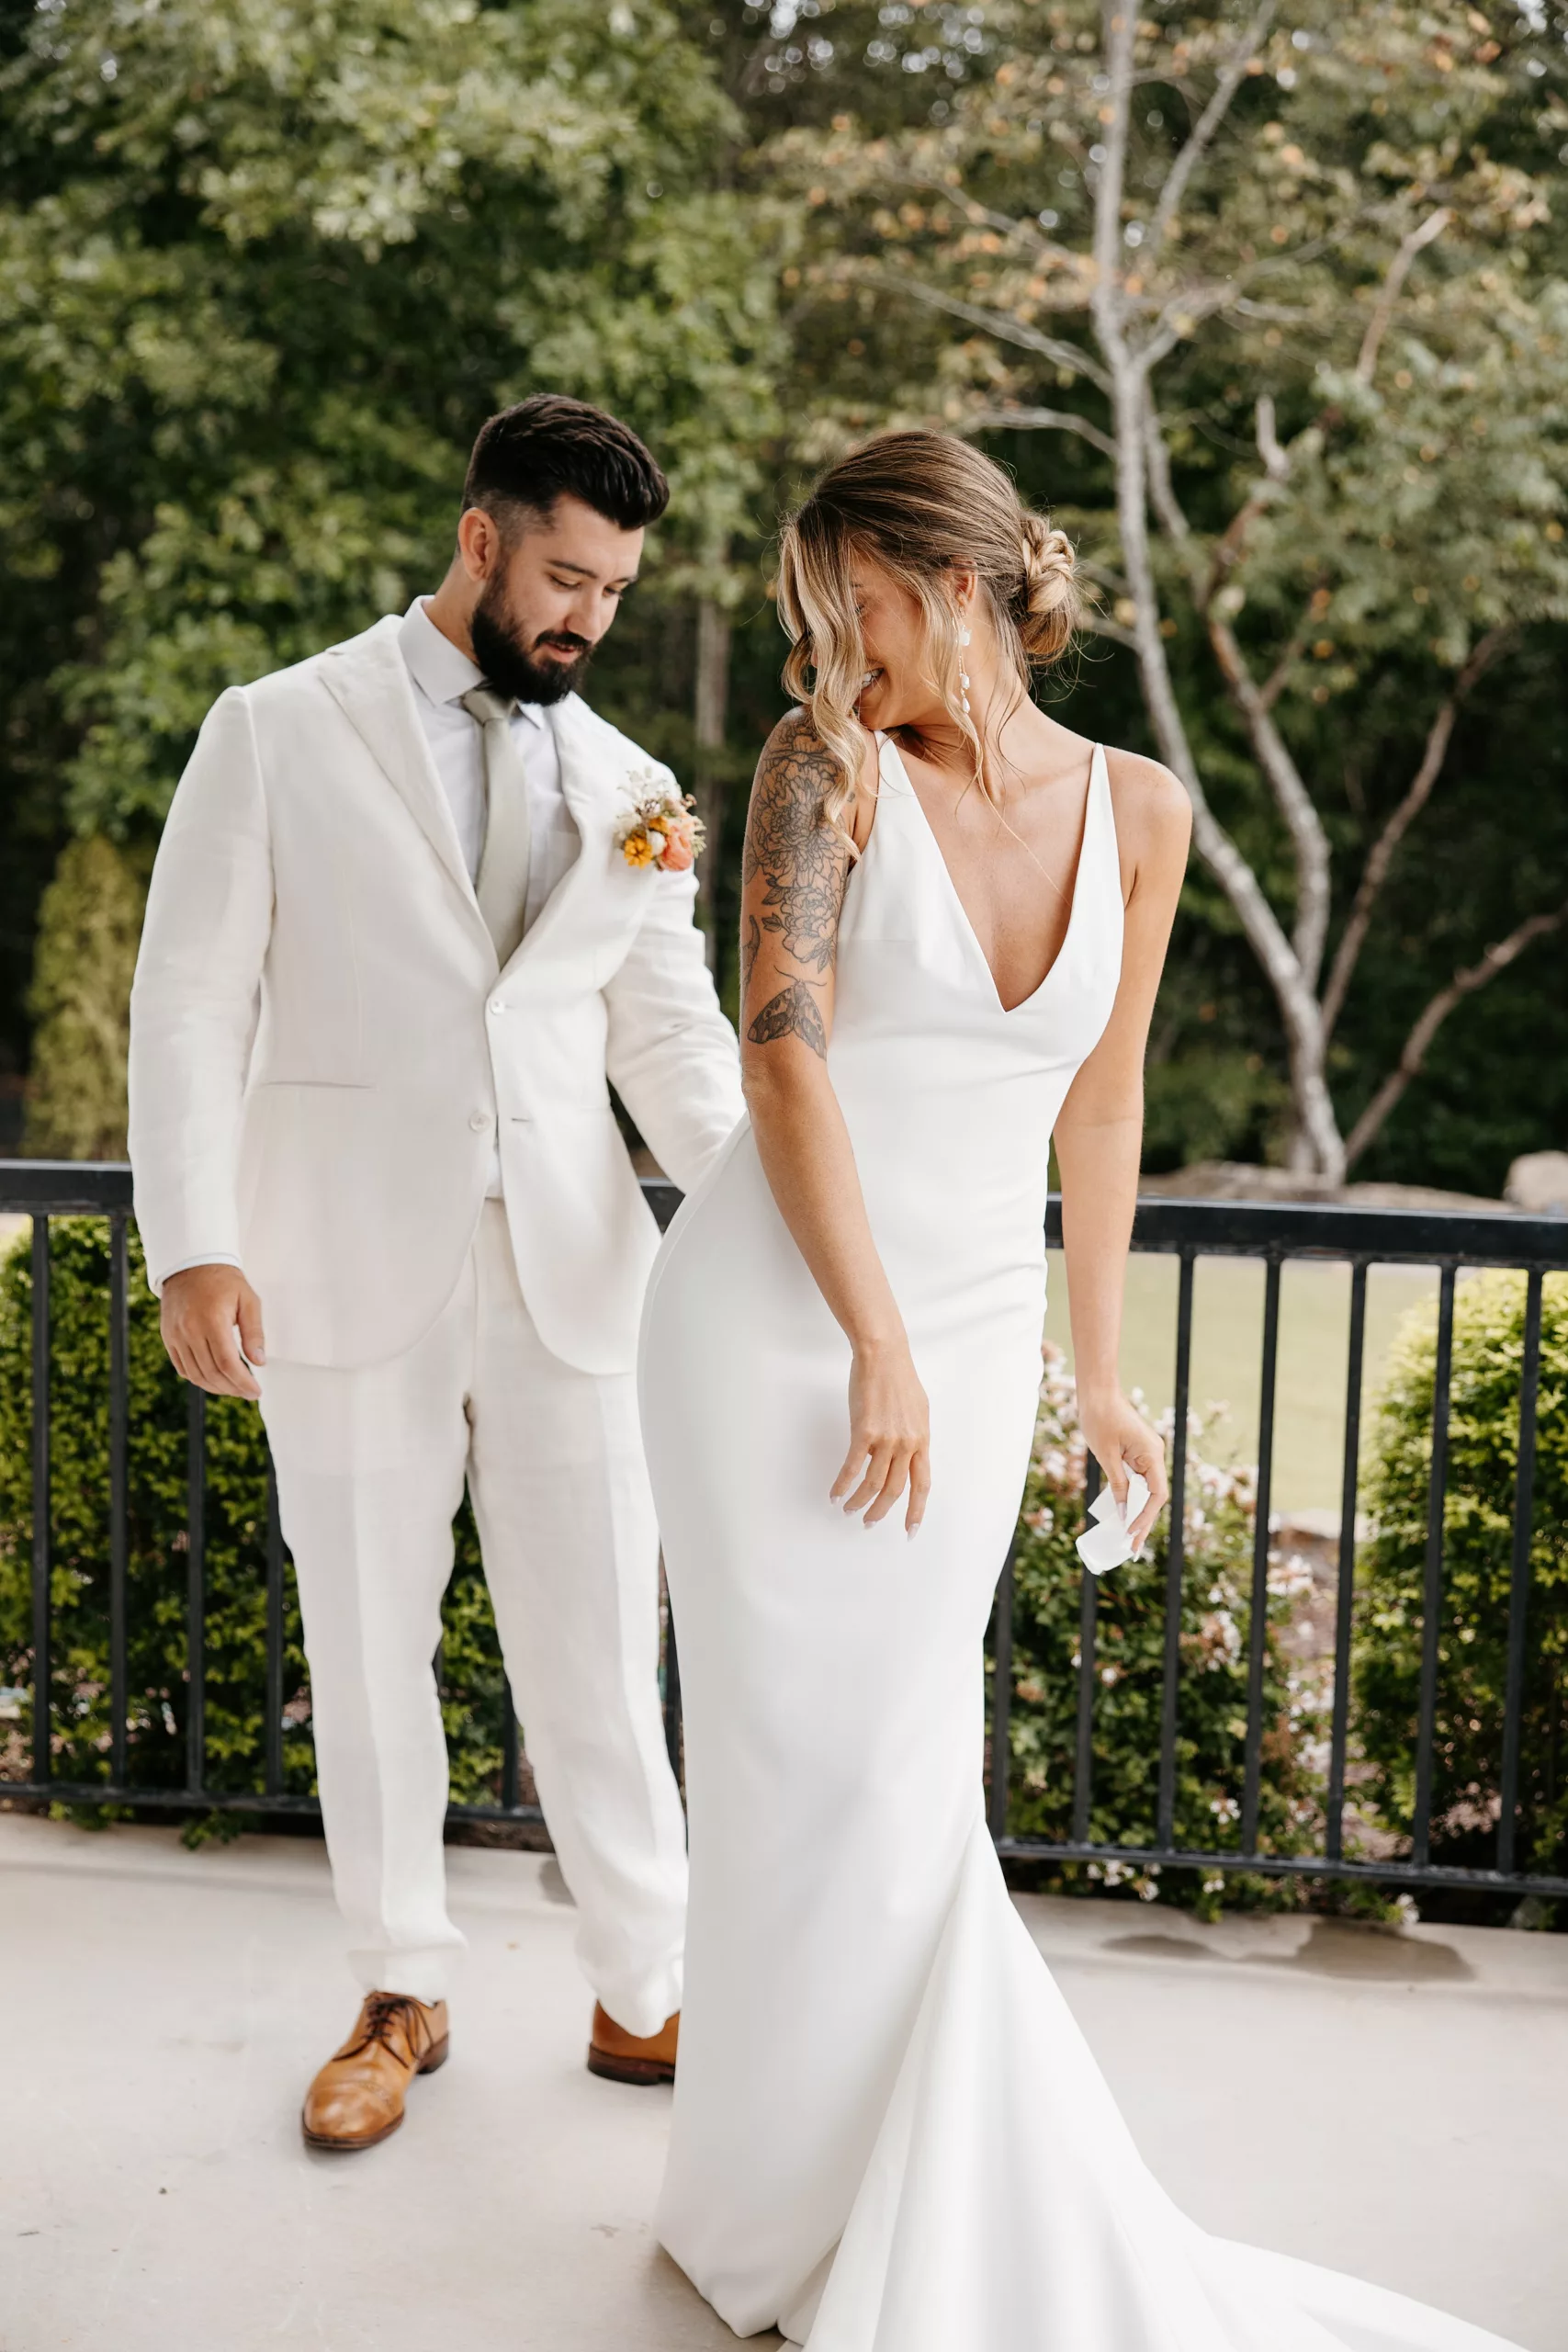 A groom looks his bride up and down in a white suit and her silk dress on a patio as he sees her for the first time